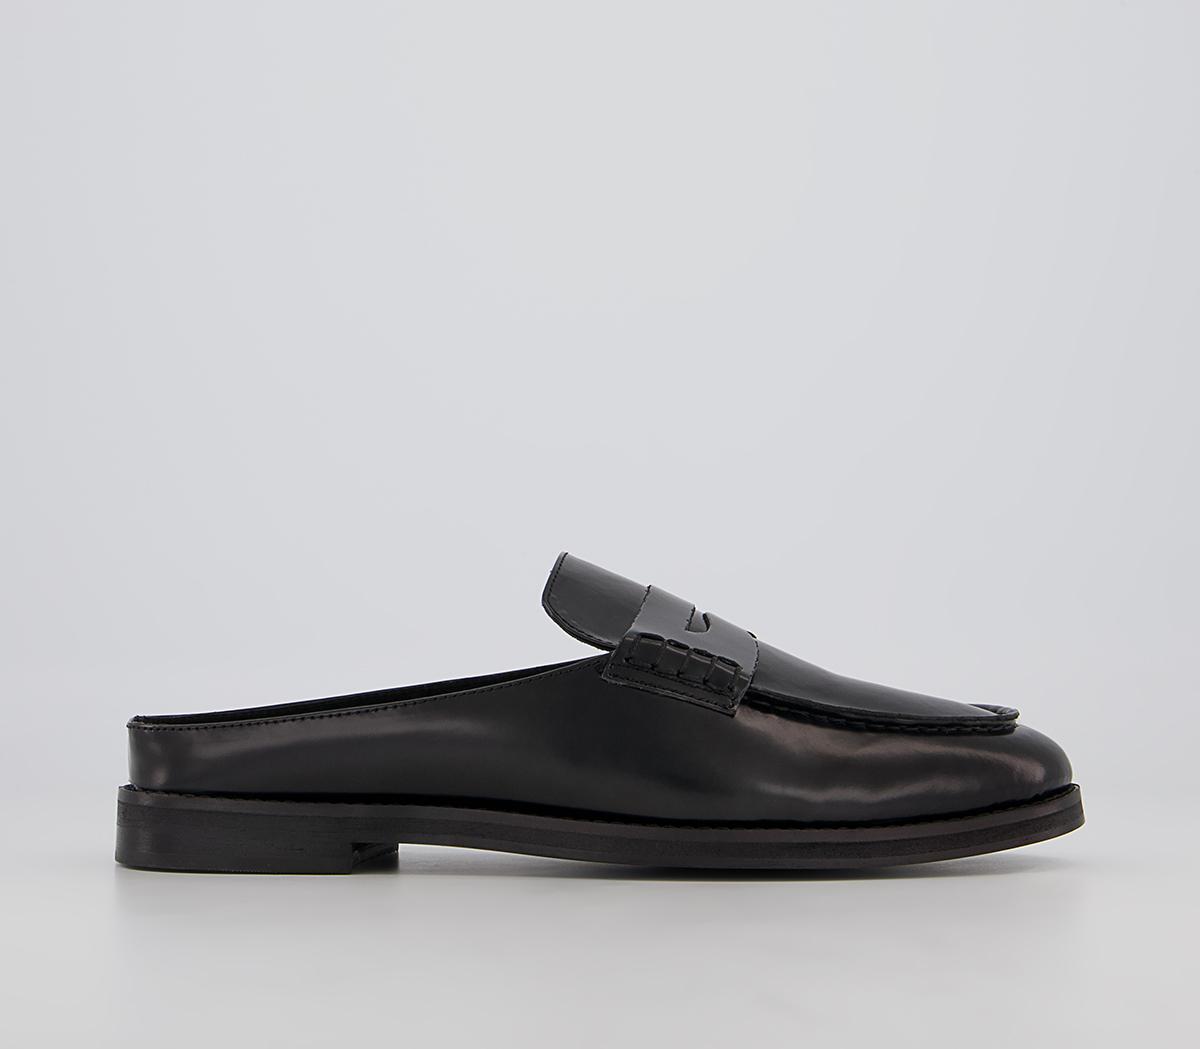 OfficeMarlow Penny Loafer MulesBlack High Shine Leather